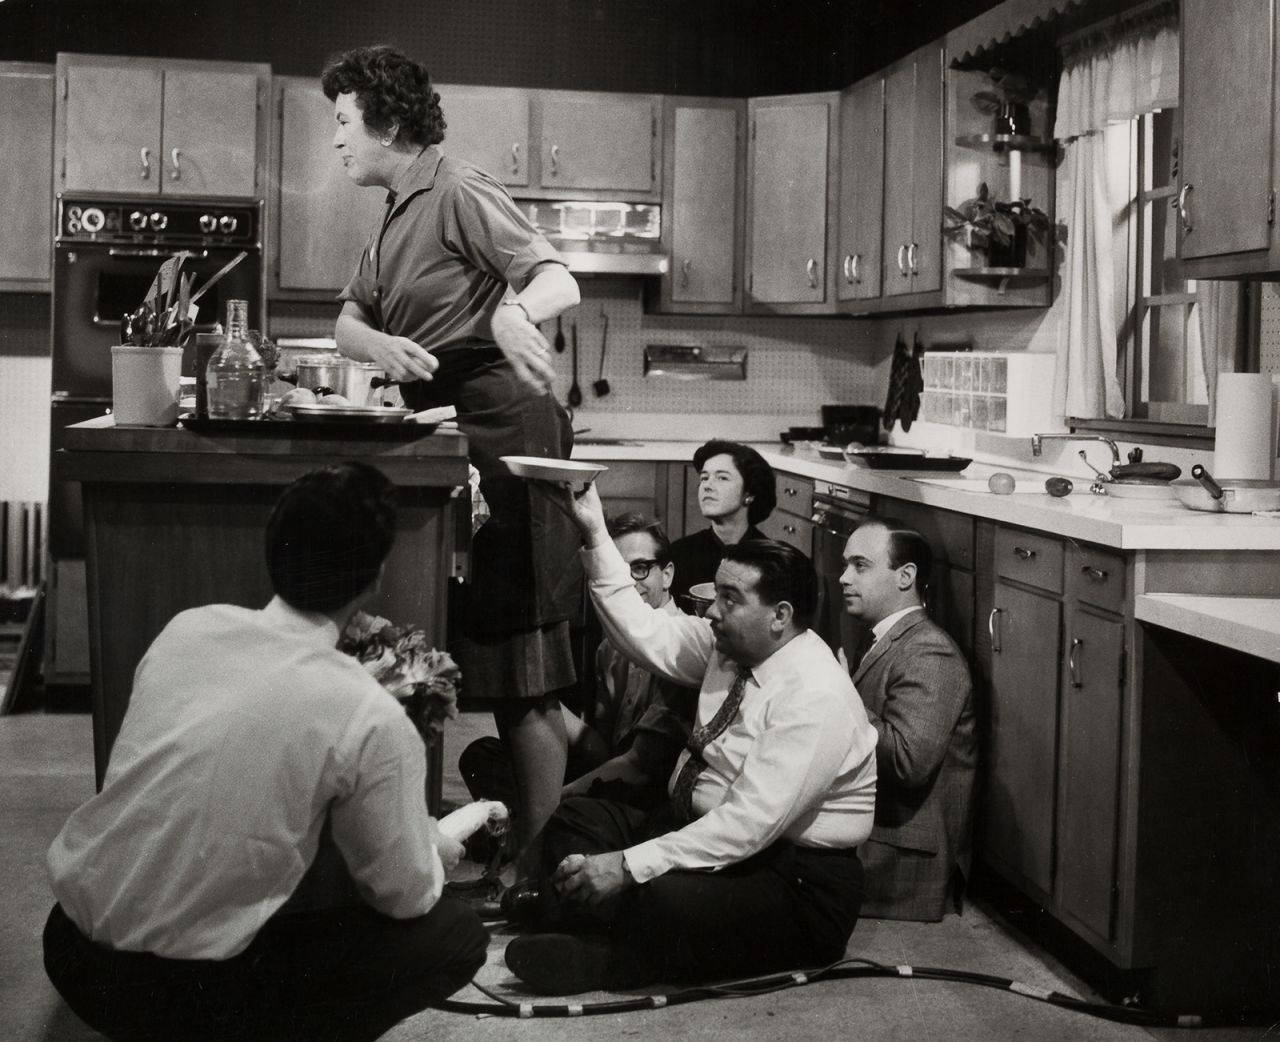 Child is joined by crew members on the set of "The French Chef" in 1963.